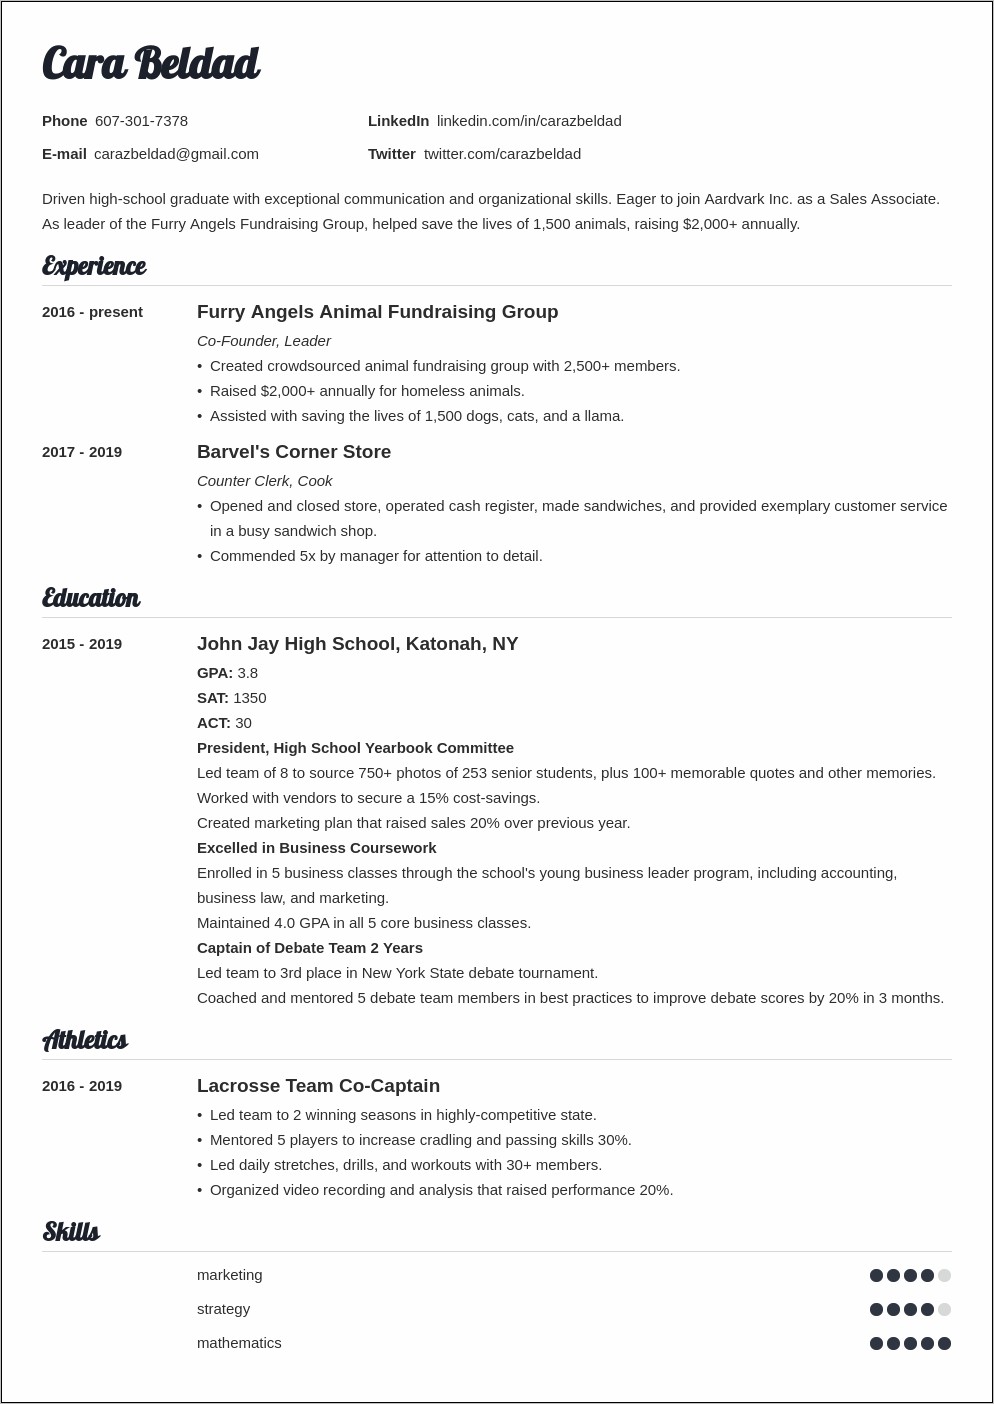 Example Resume Education With Degree